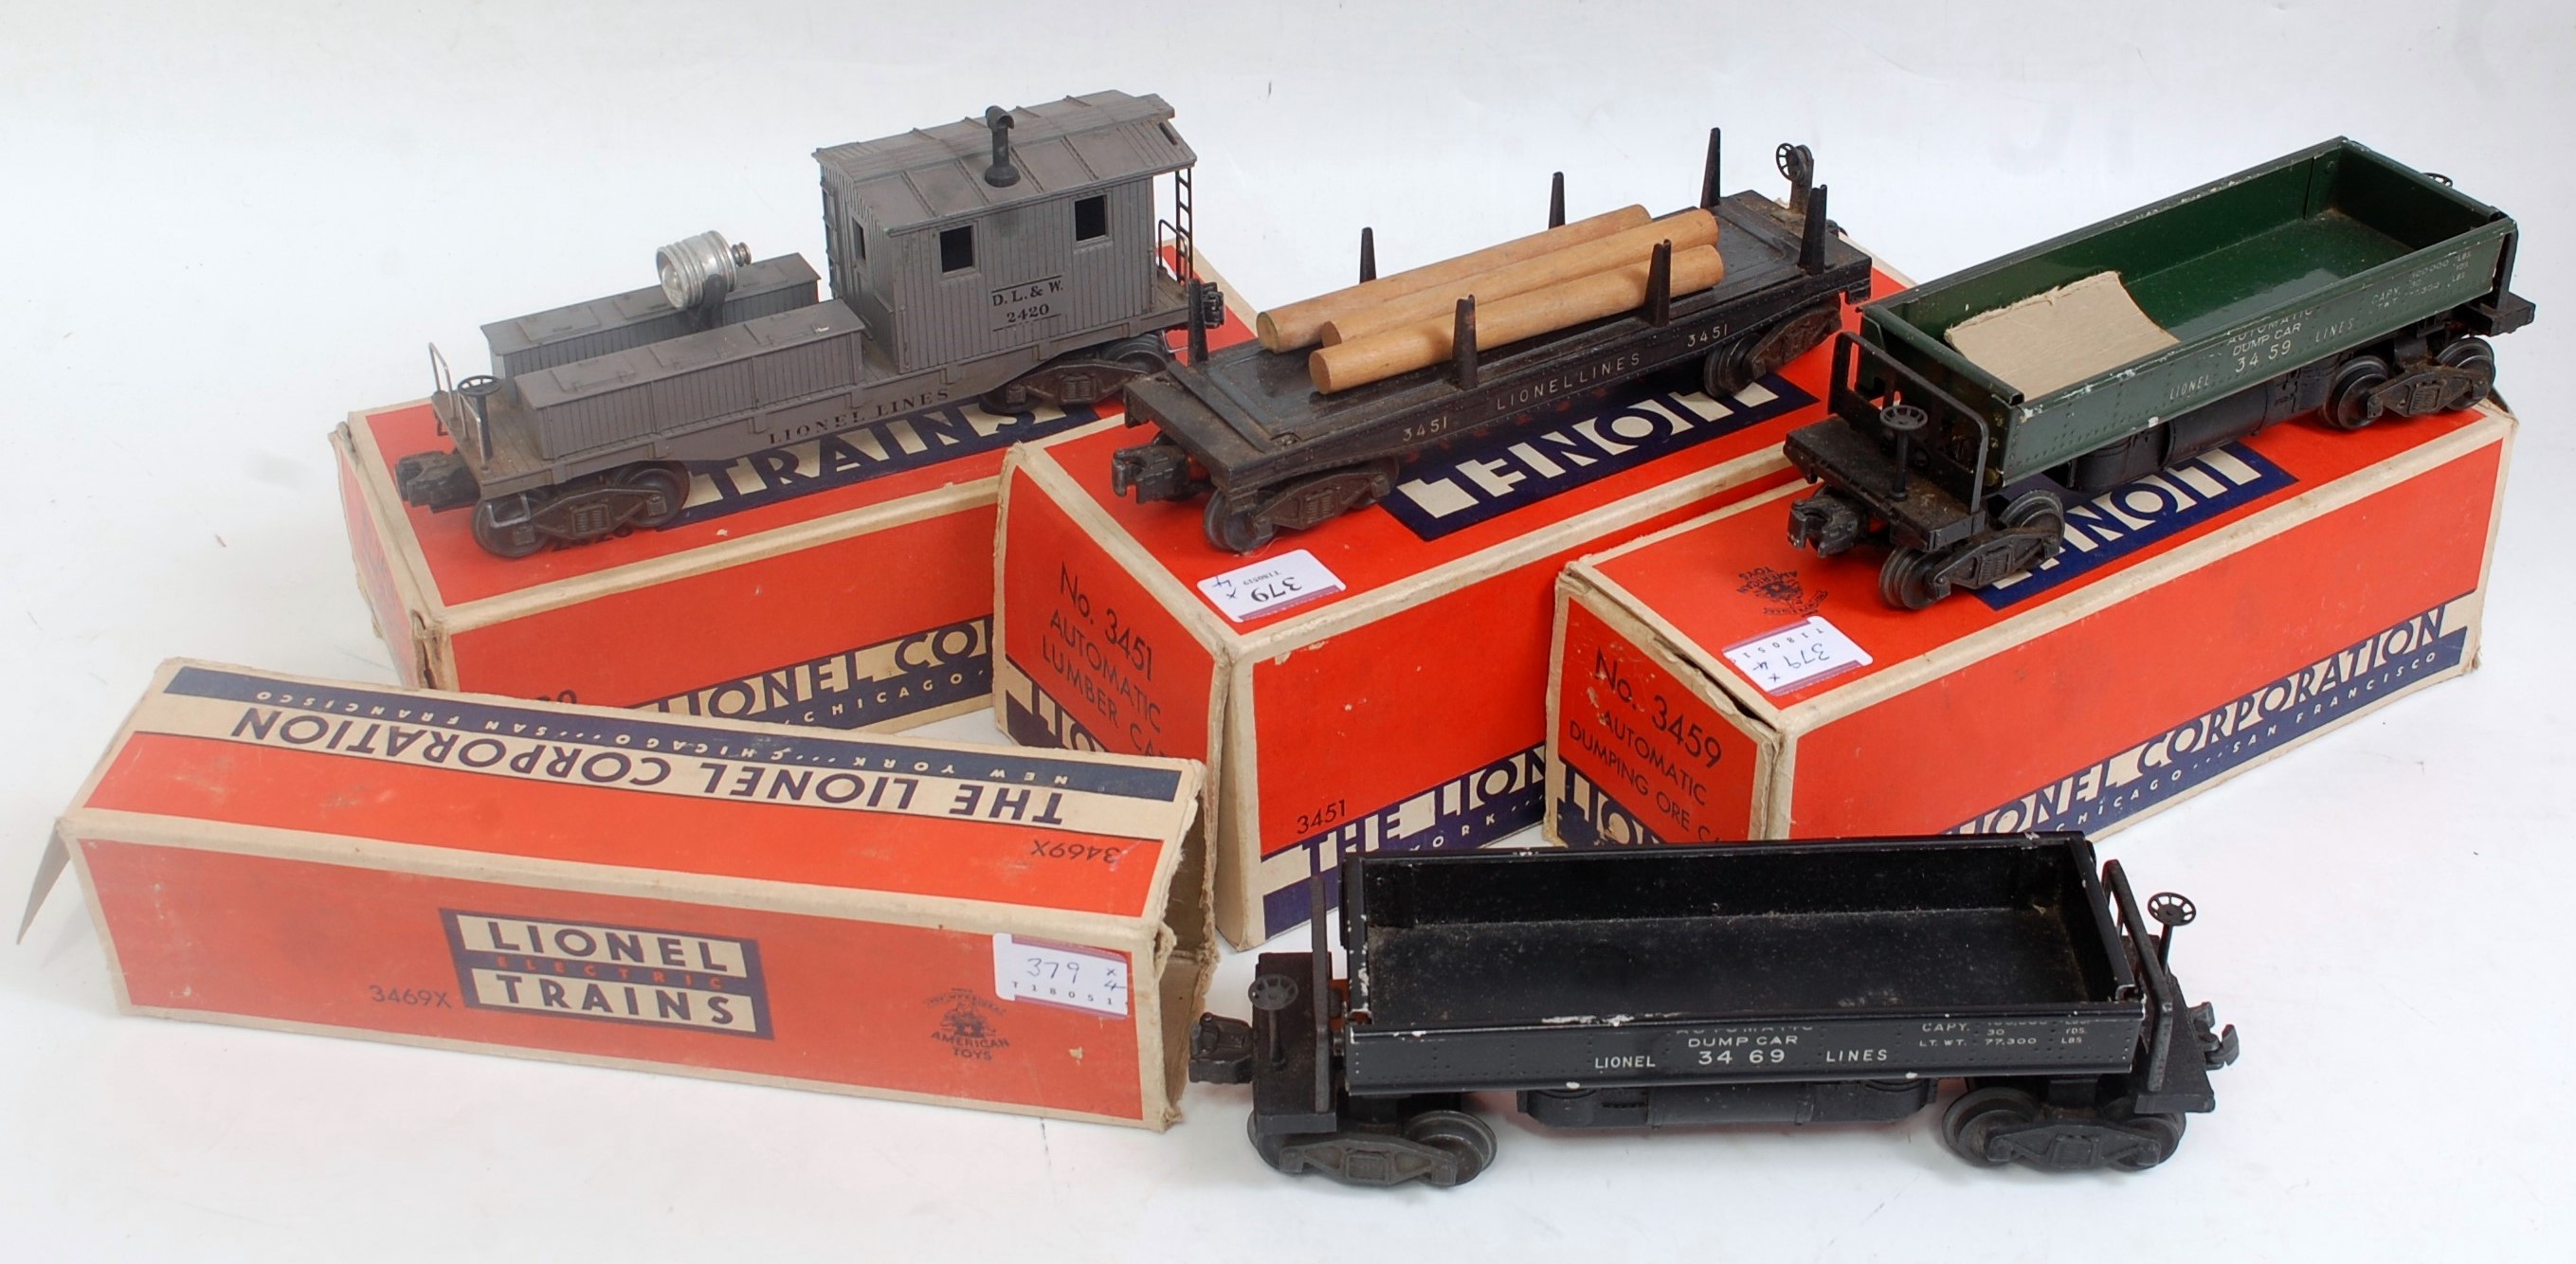 4x Lionel boxed freight items including black automatic lumber car No. 3451 (G-BF), olive green